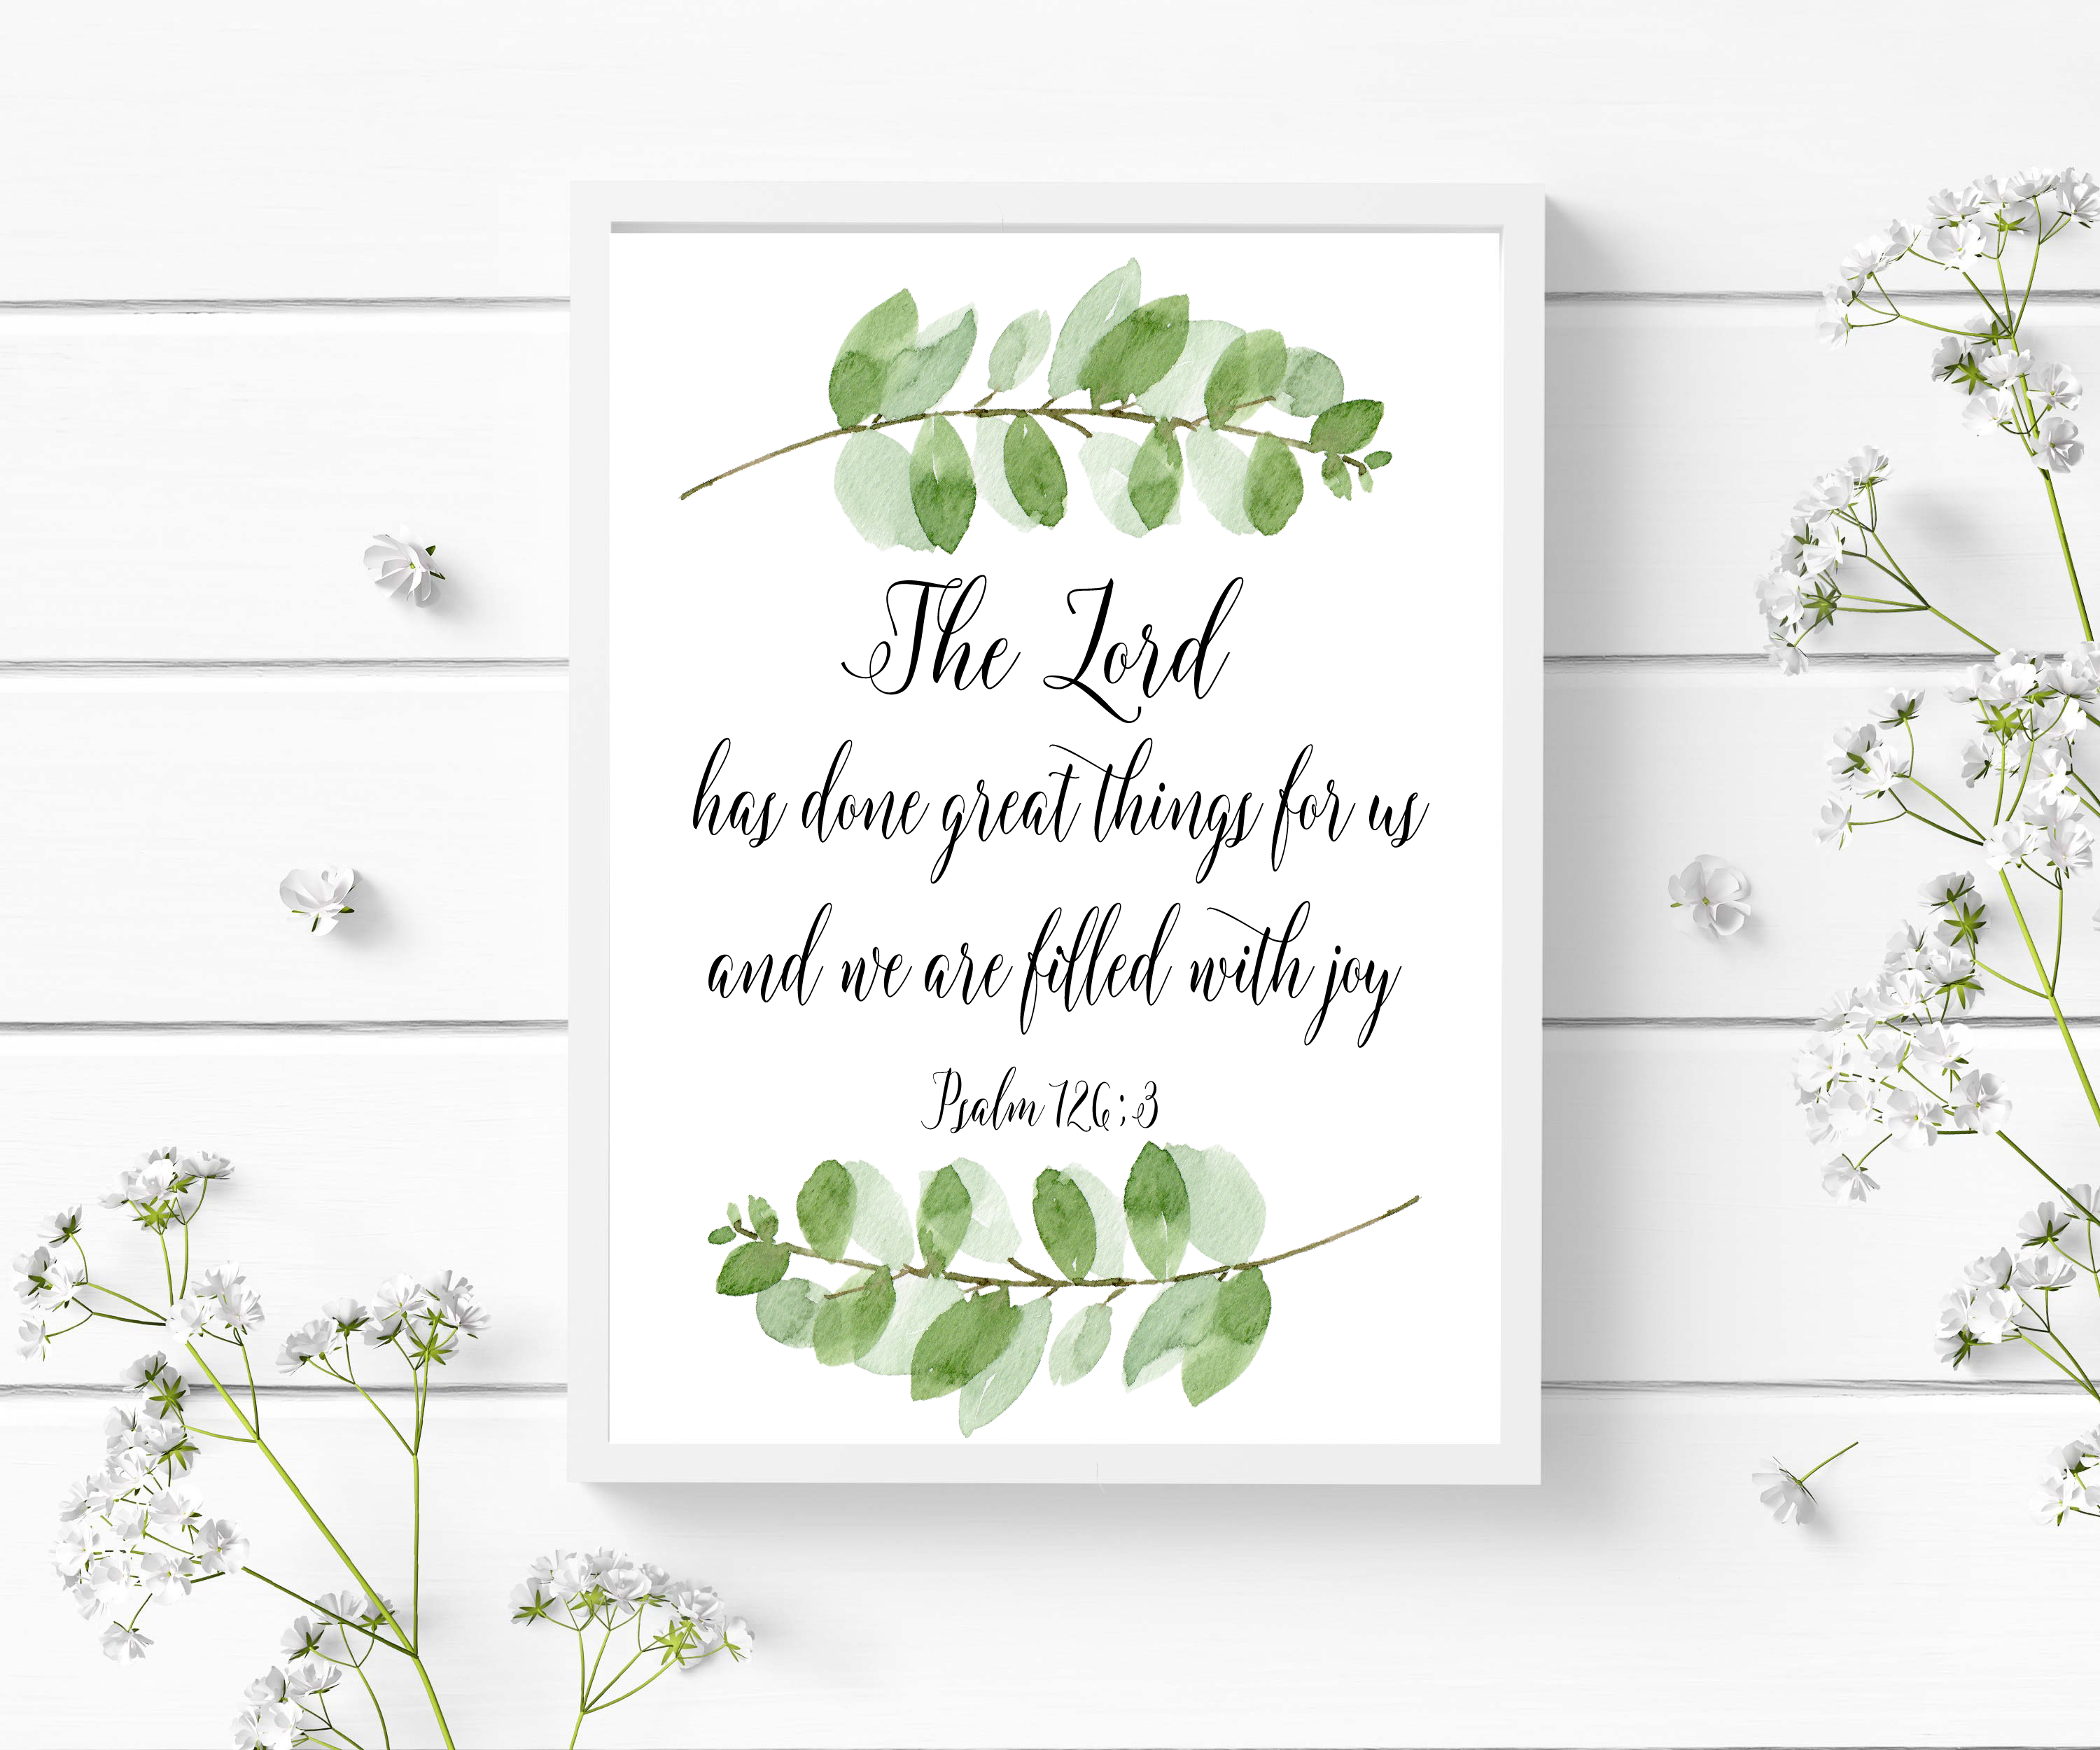 Psalm 126:3 - The Lord Has Done Great Things - Bible Verse Prints